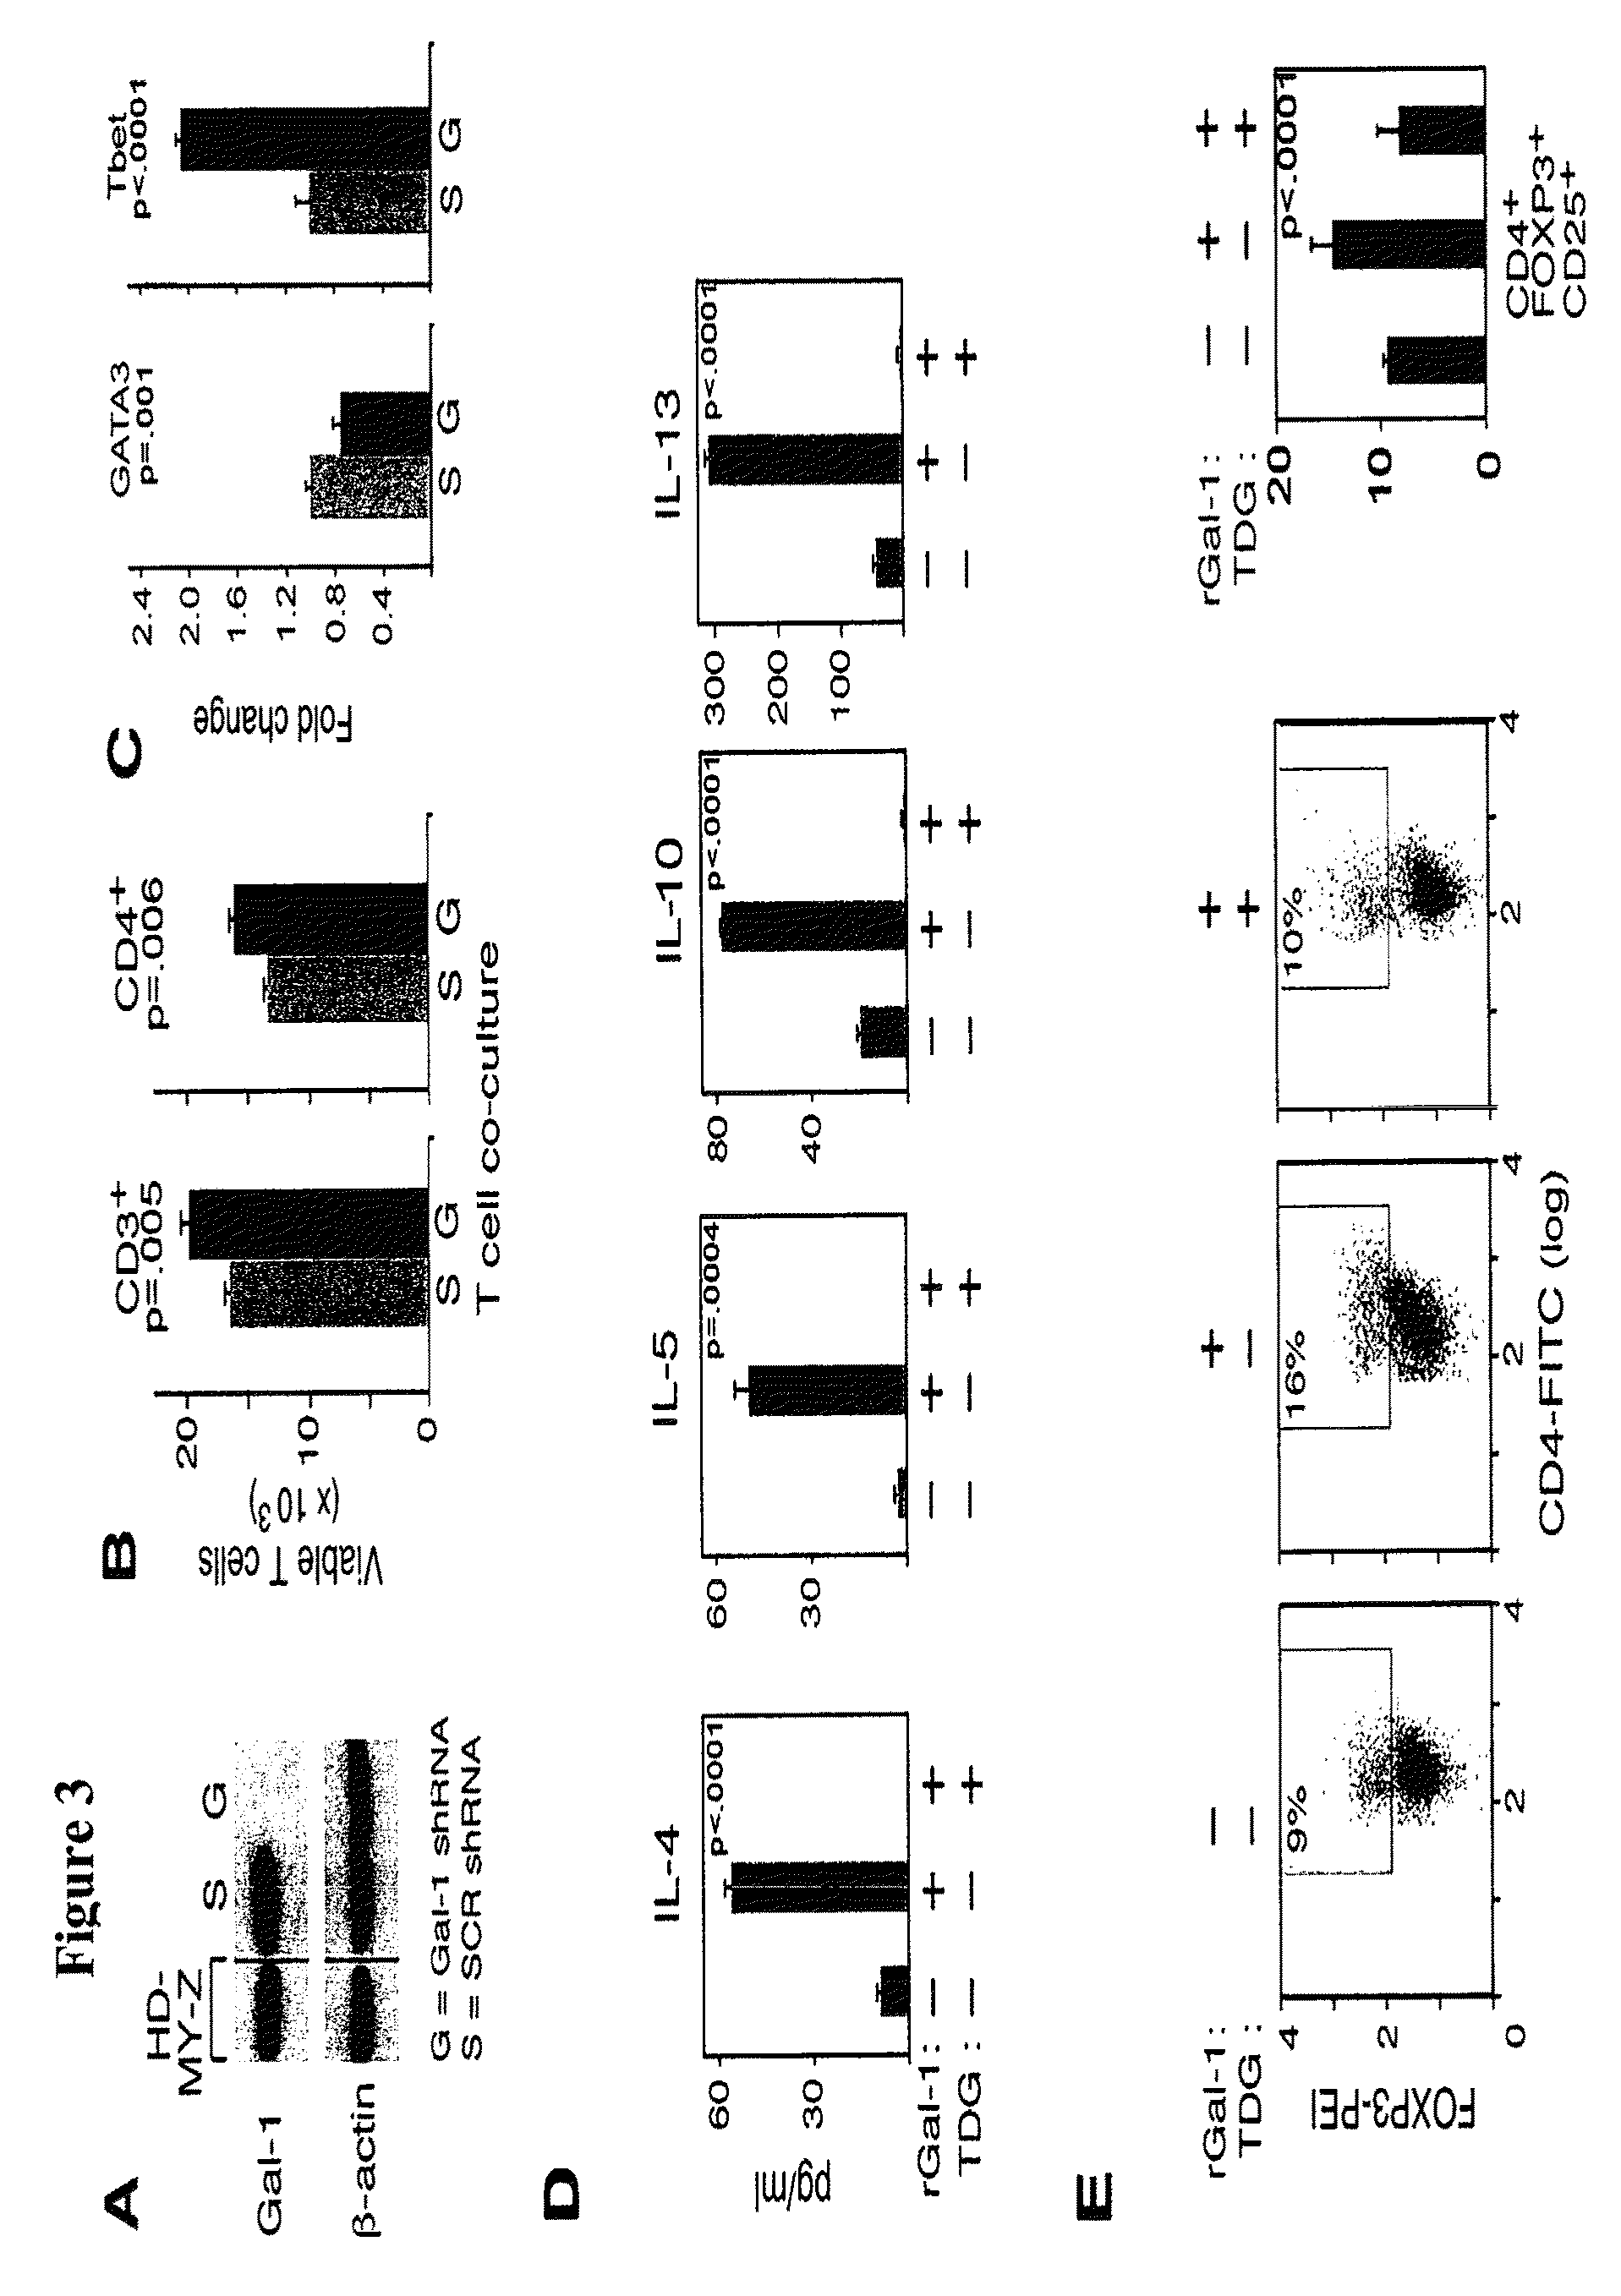 Compositions, kits, and methods for the modulation of immune responses using galectin-1